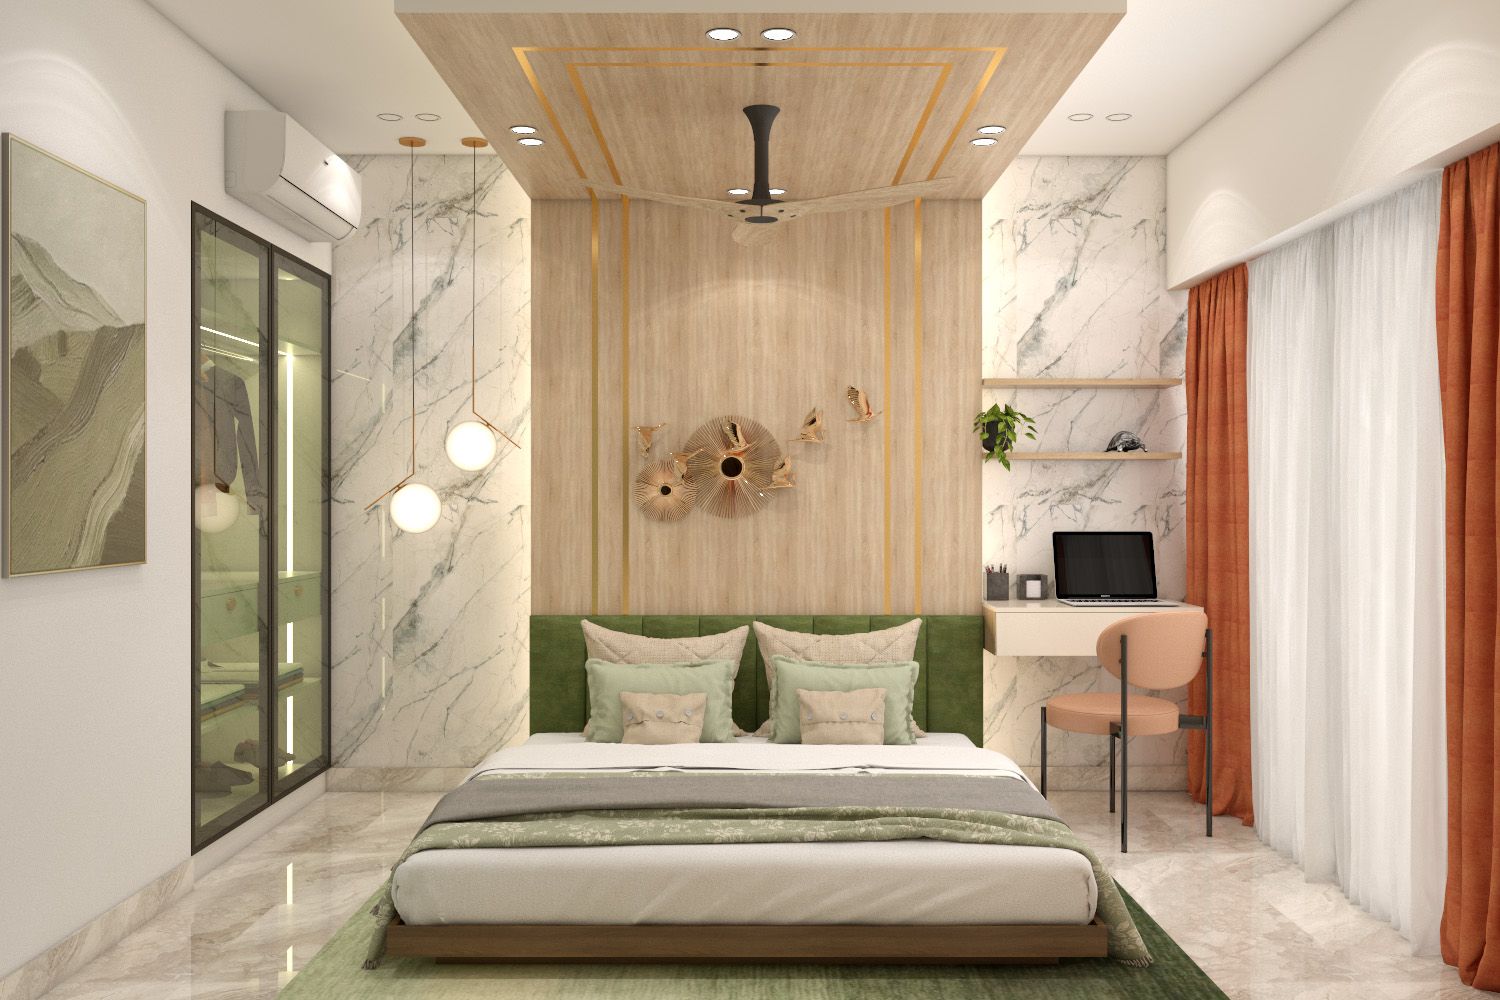 Contemporary Floor-To-Ceiling Bedroom False Ceiling Design With Wooden Panel